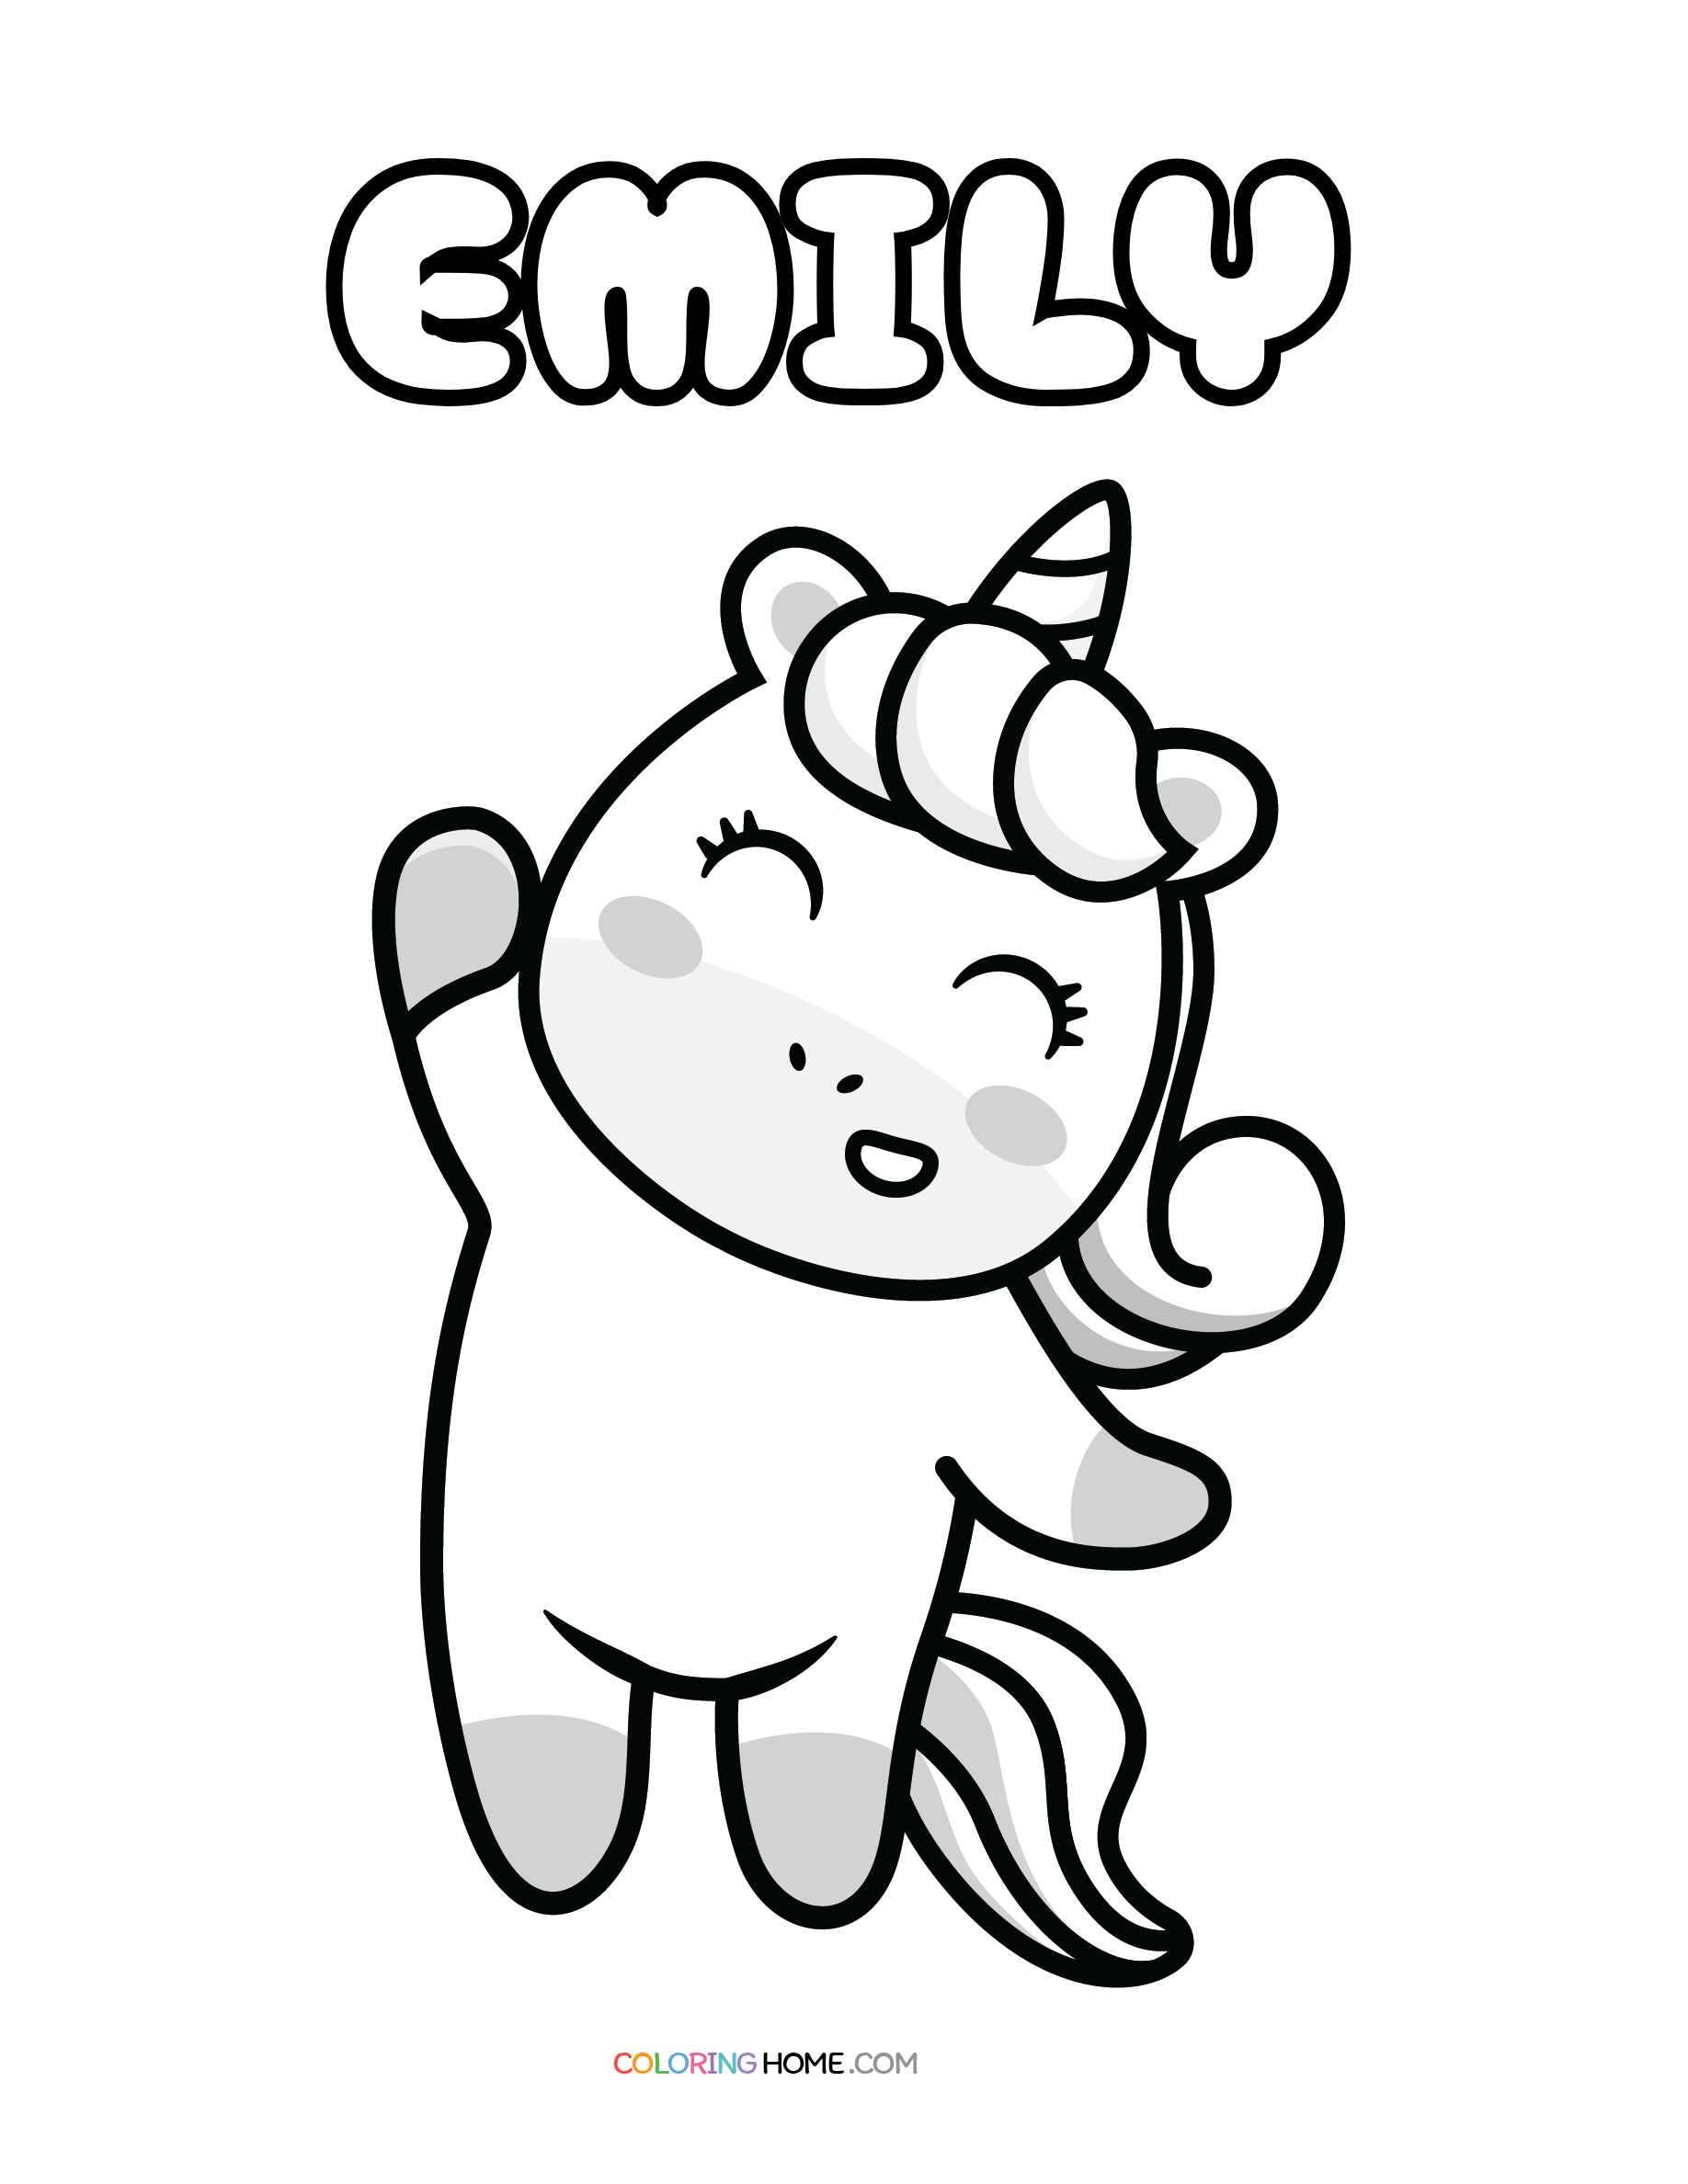 Emily unicorn coloring page